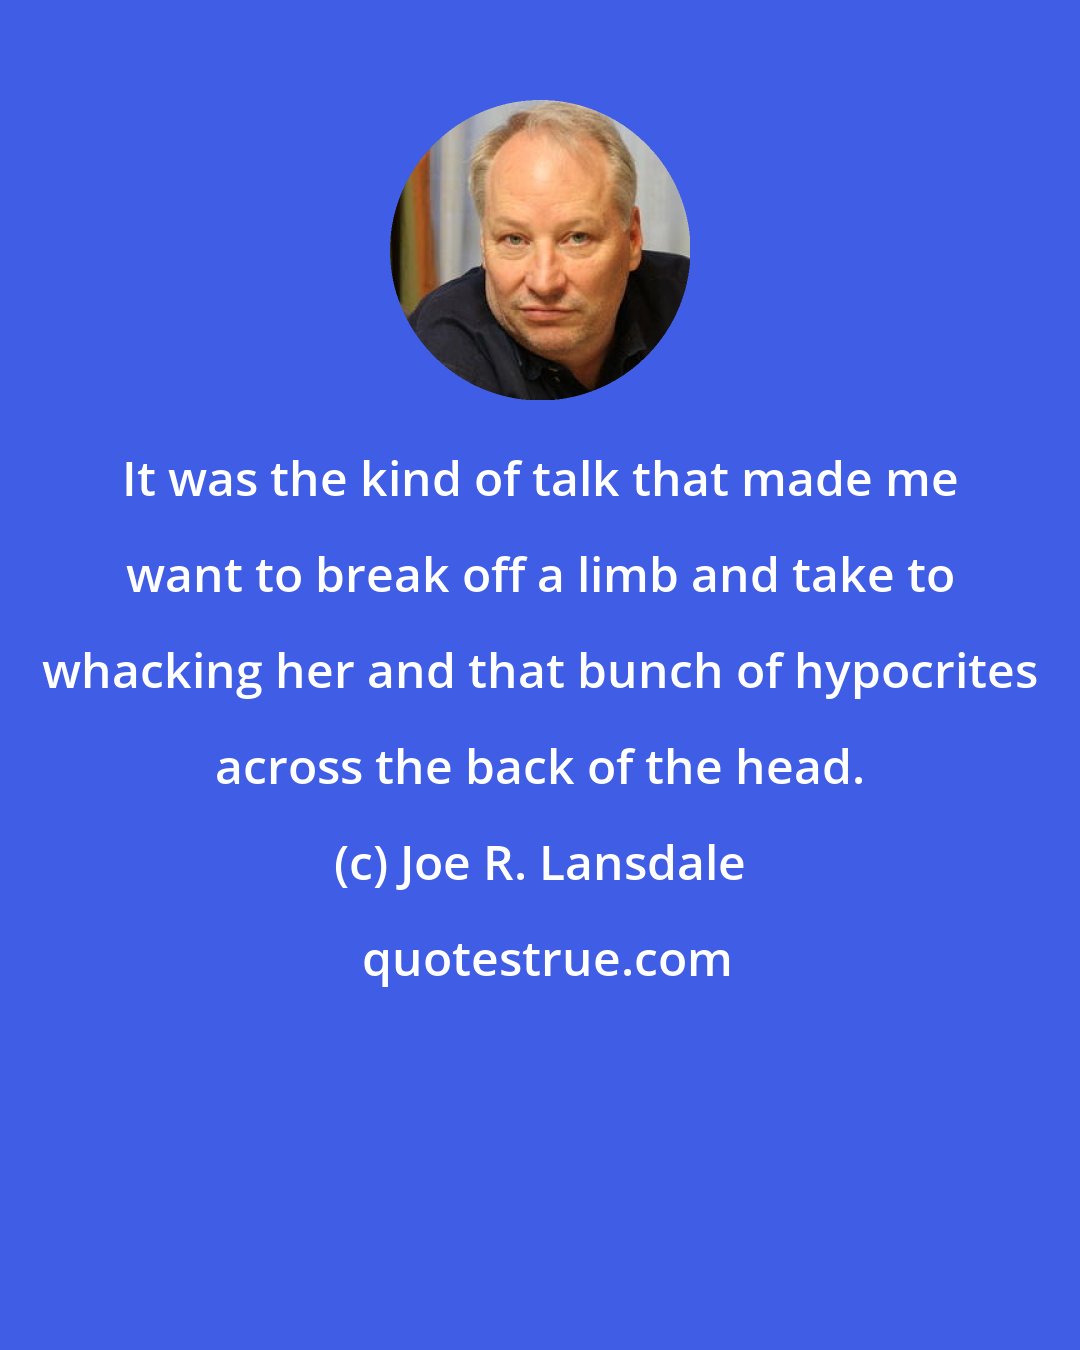 Joe R. Lansdale: It was the kind of talk that made me want to break off a limb and take to whacking her and that bunch of hypocrites across the back of the head.